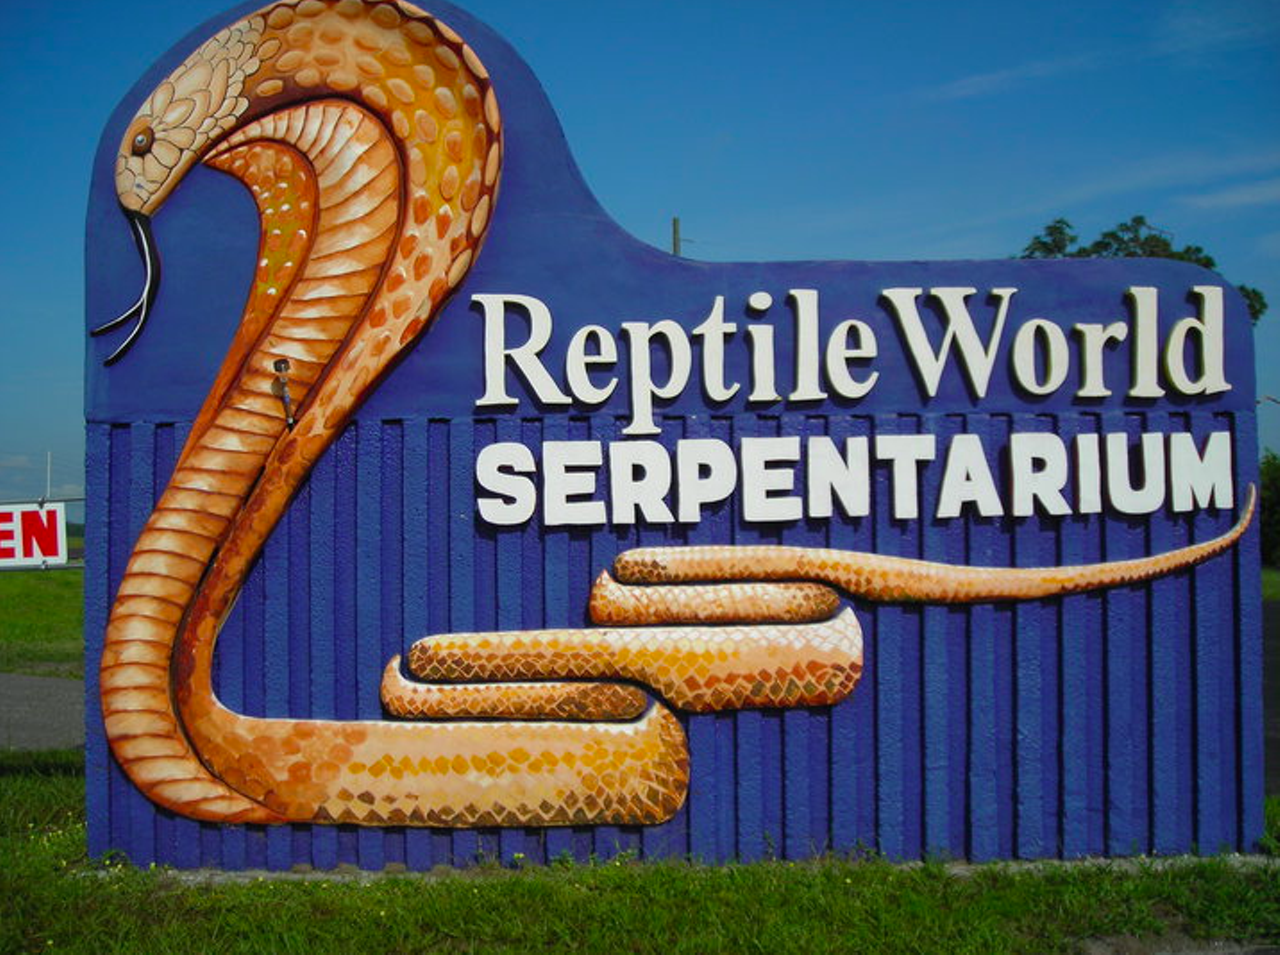 Reptile World Serpentarium
5705 E. Irlo Bronson Memorial Highway, St. Cloud
This Osceola County reptile zoo features more than 75 species of snakes, as well as lizards, crocodiles, alligators and turtles. You can learn a thing or two about native and exotic reptiles, see some critters or even attend a venom-milking show.